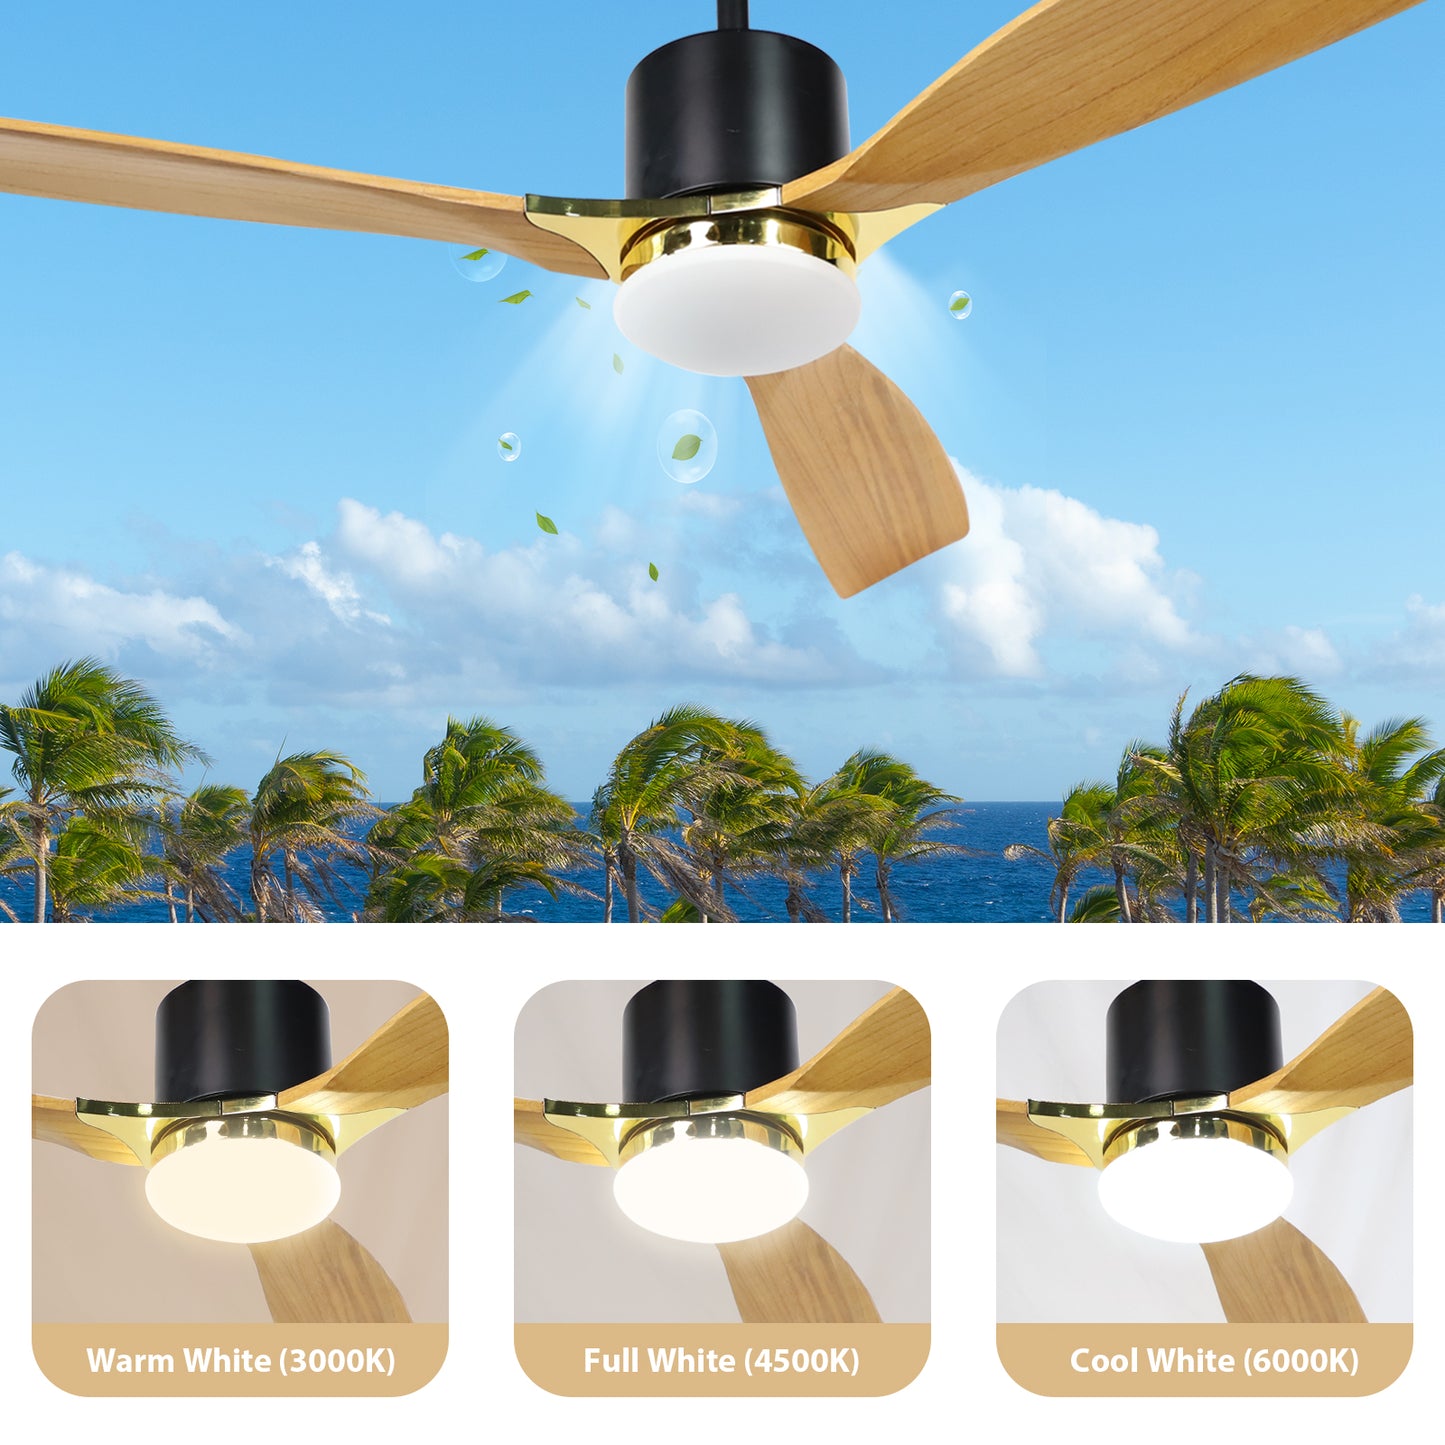 CAD 52 in. Intergrated LED Indoor Sand Nickel Ceiling Fan with Light